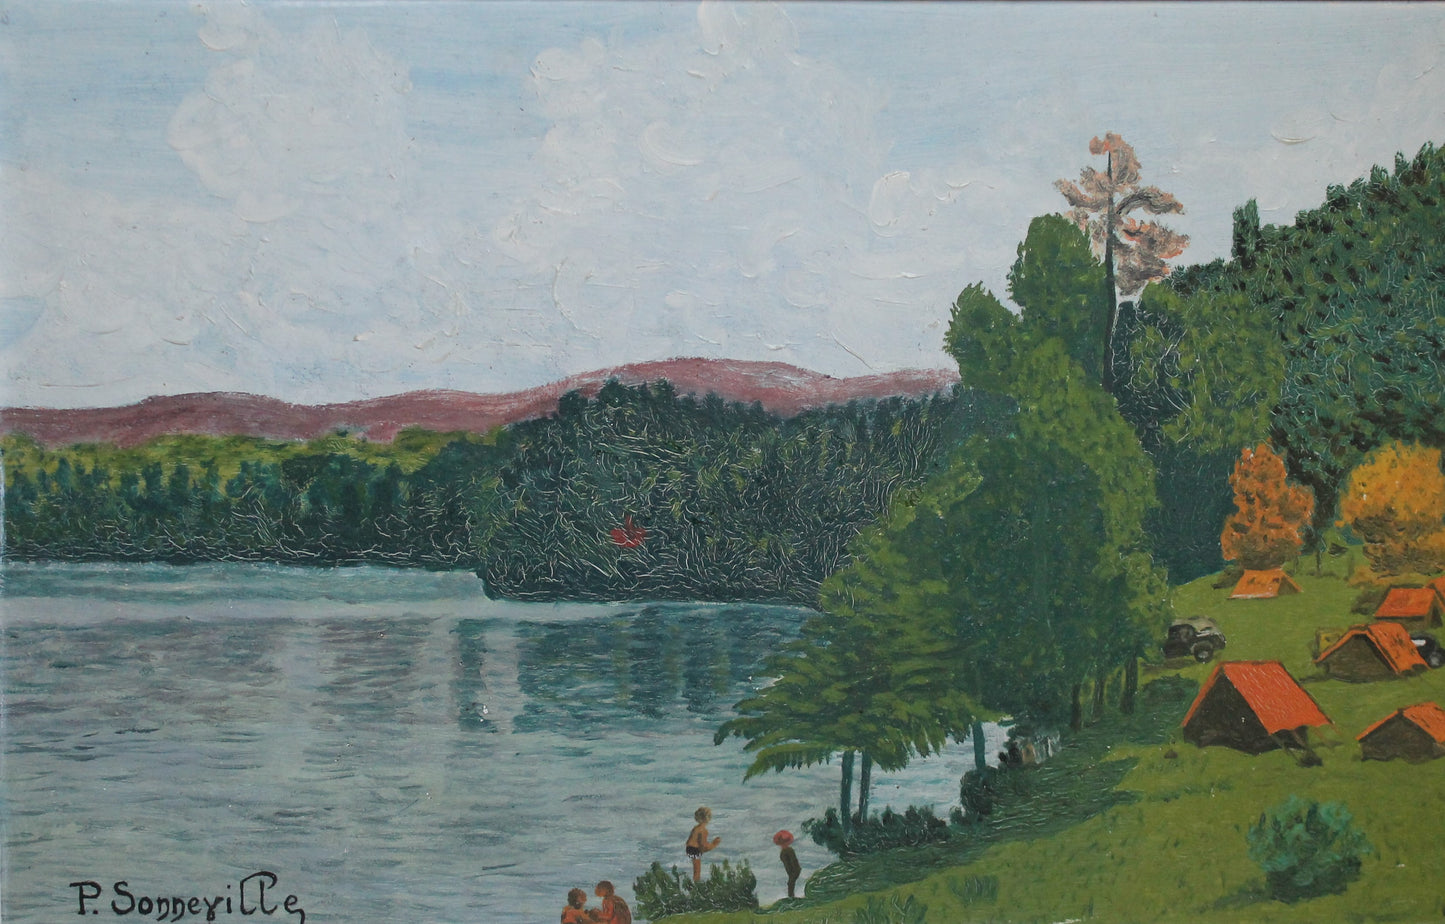 P. Sonneville "Holidays at the lake"